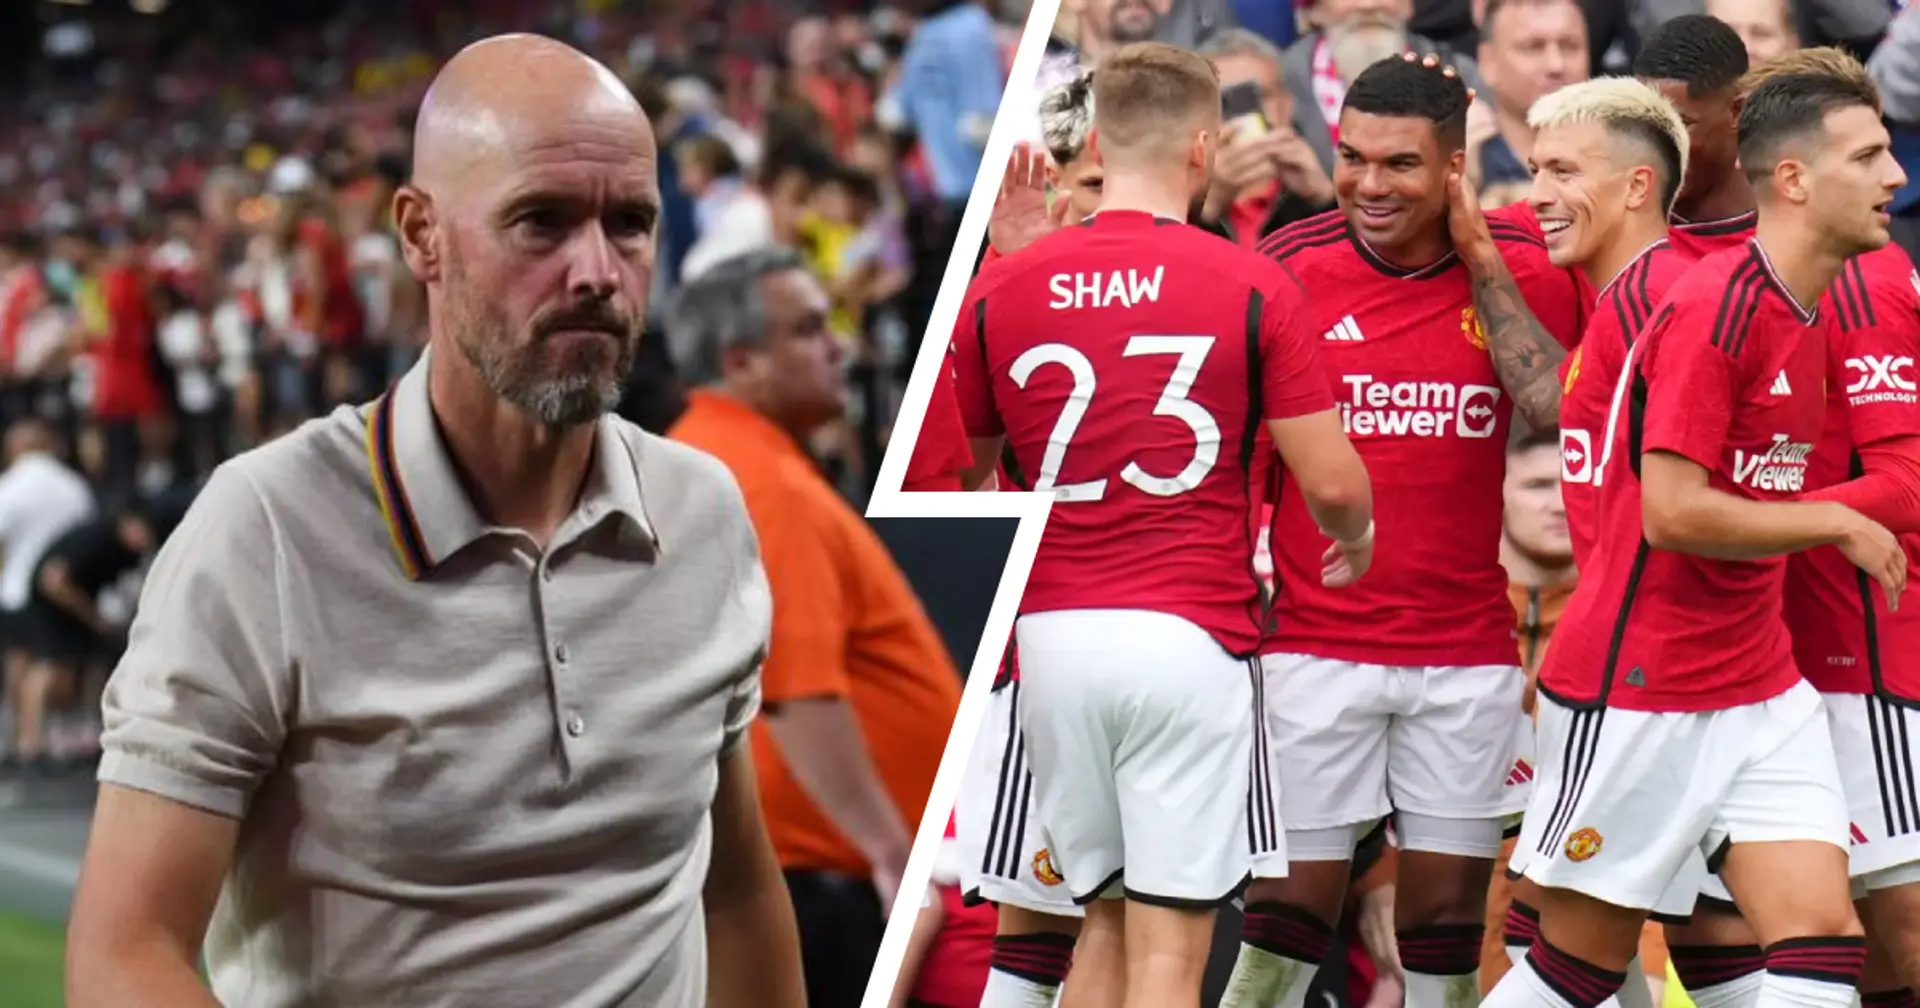 A point of concern for Ten Hag? Man United have one of the youngest squads in the Premier League